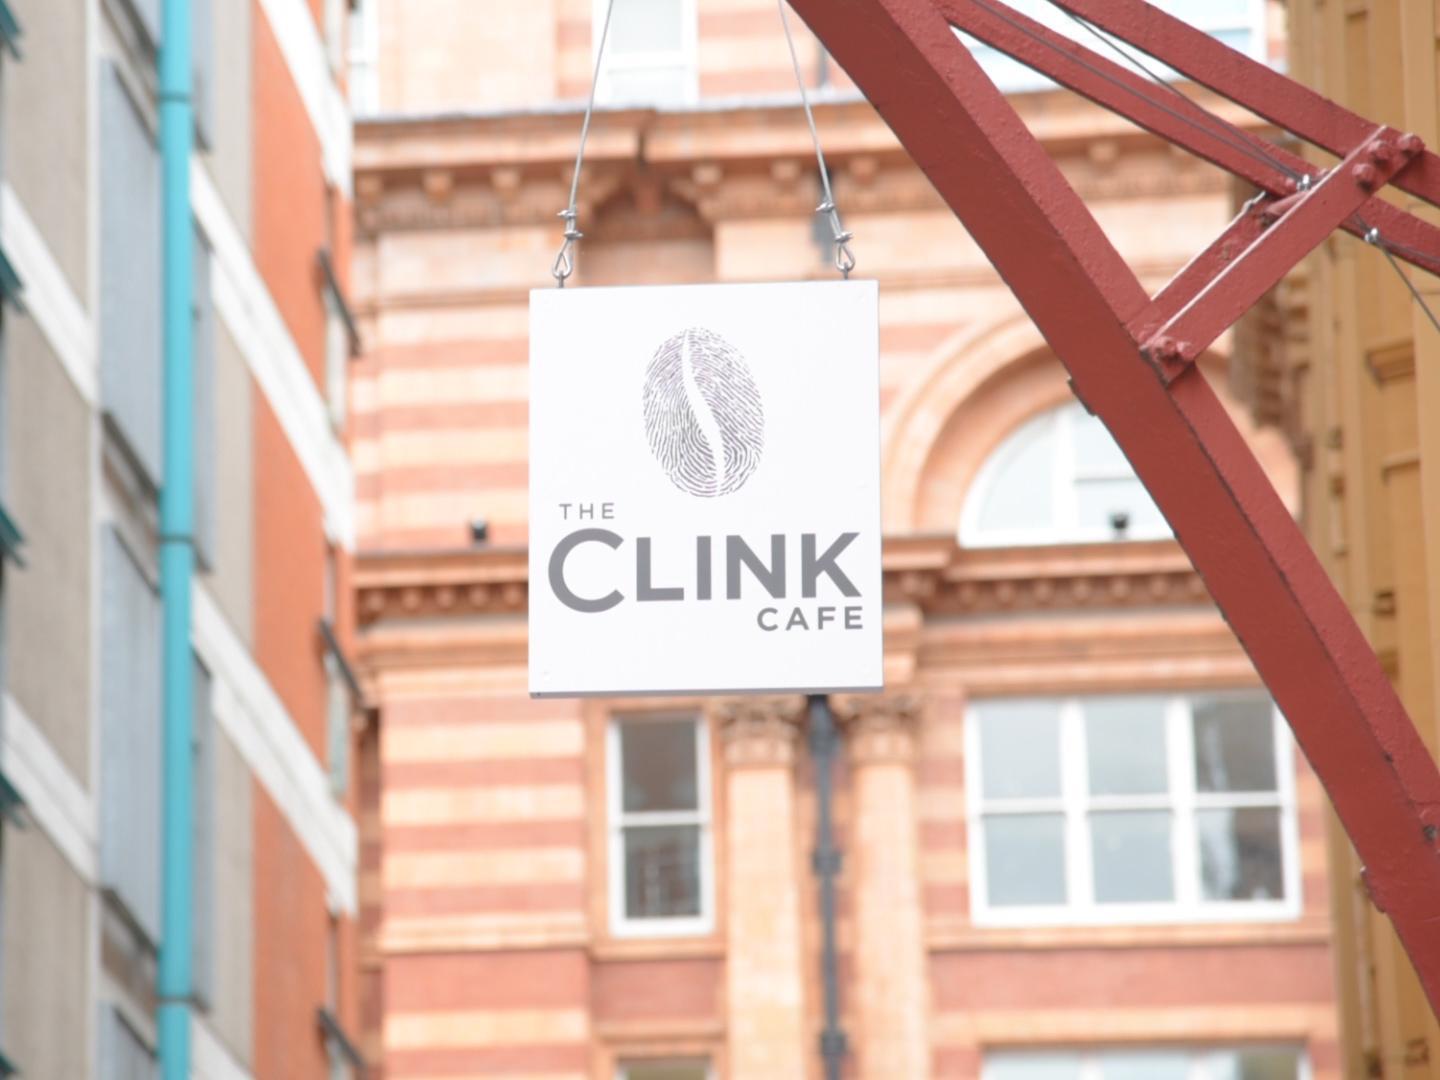 Clink opened this summer in Manchester’s Grade II listed Canada House building